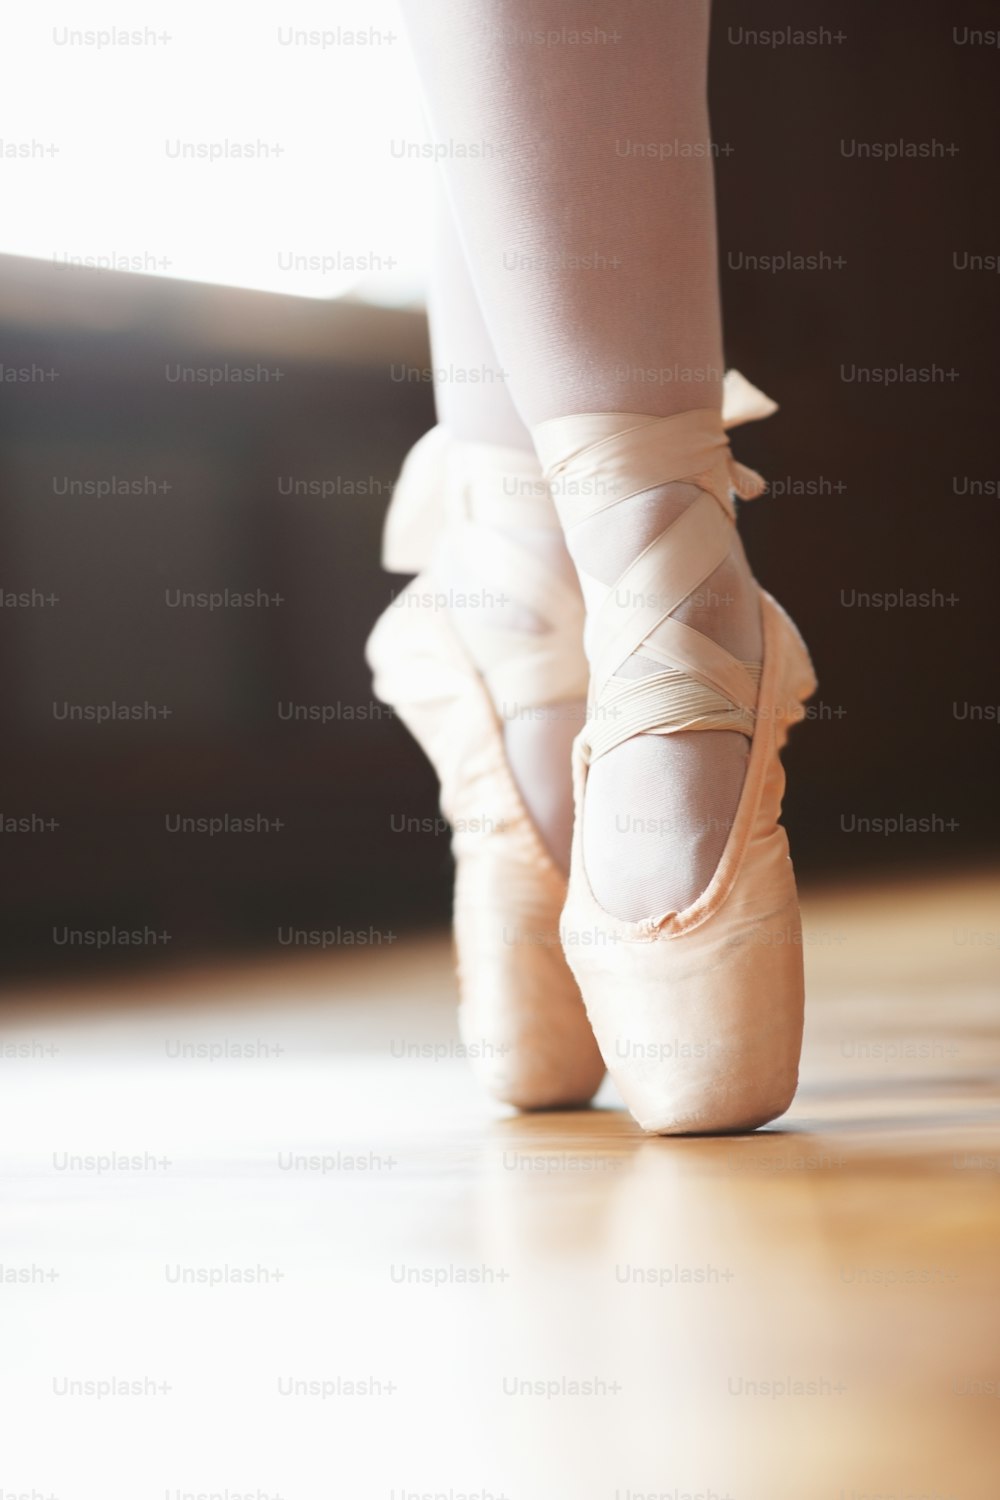 a close up of a person's feet wearing ballet shoes